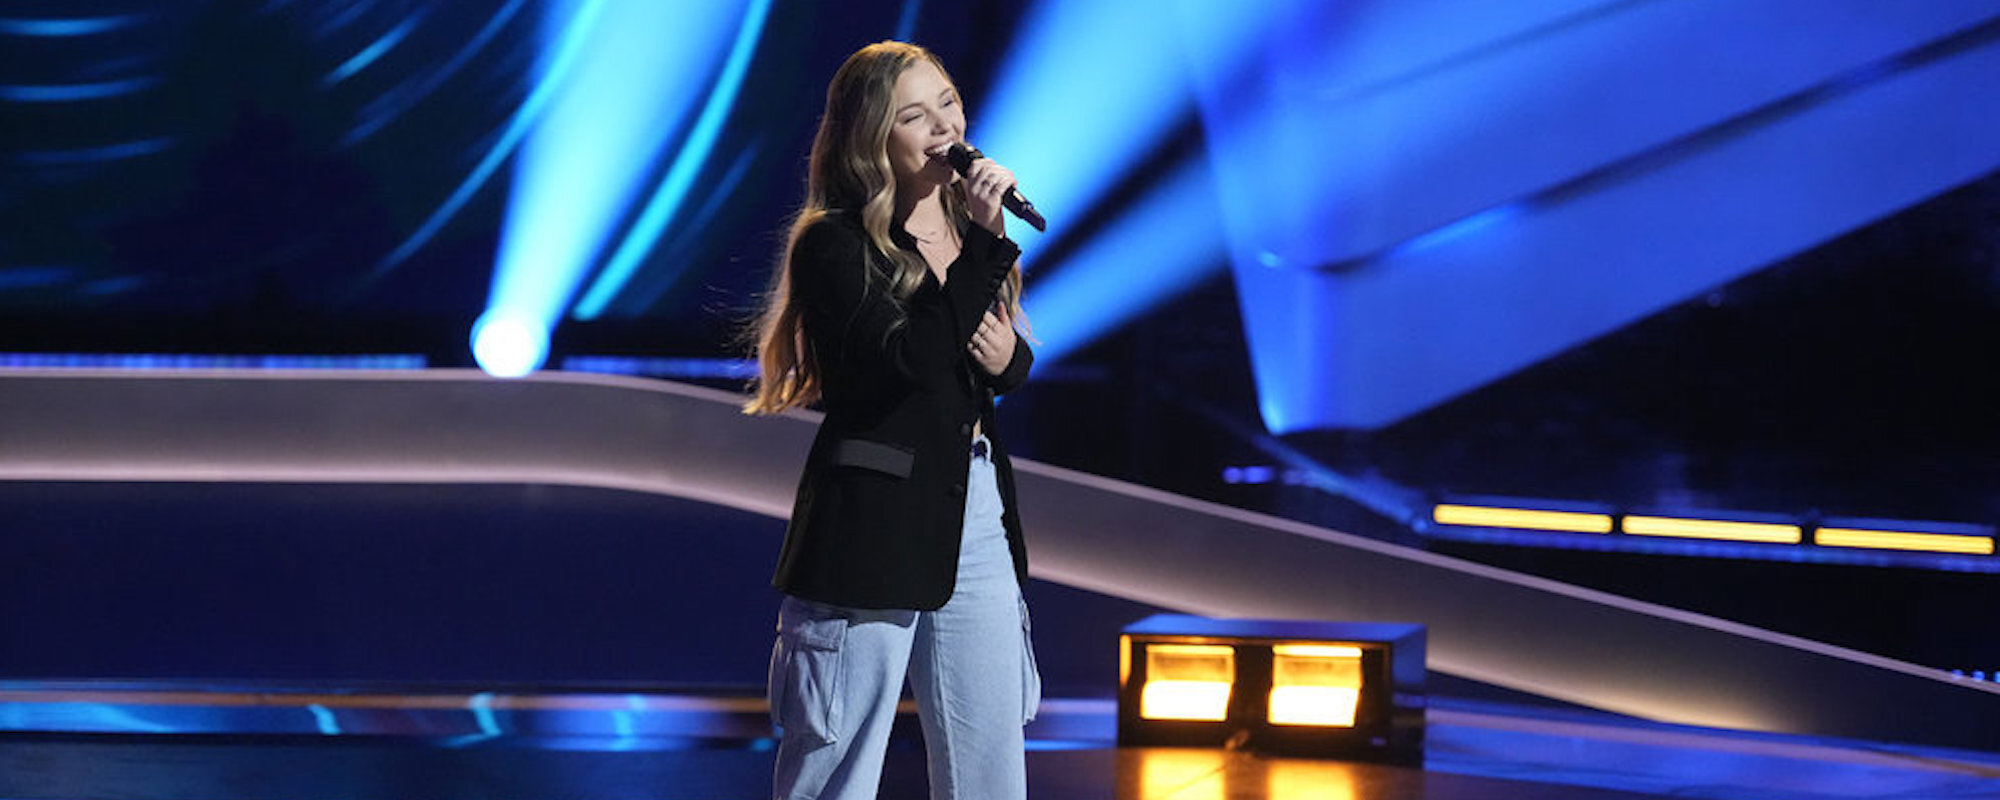 Claudia B. Shocked by Three Chair Turns for Michael Jackson Cover on ‘The Voice’